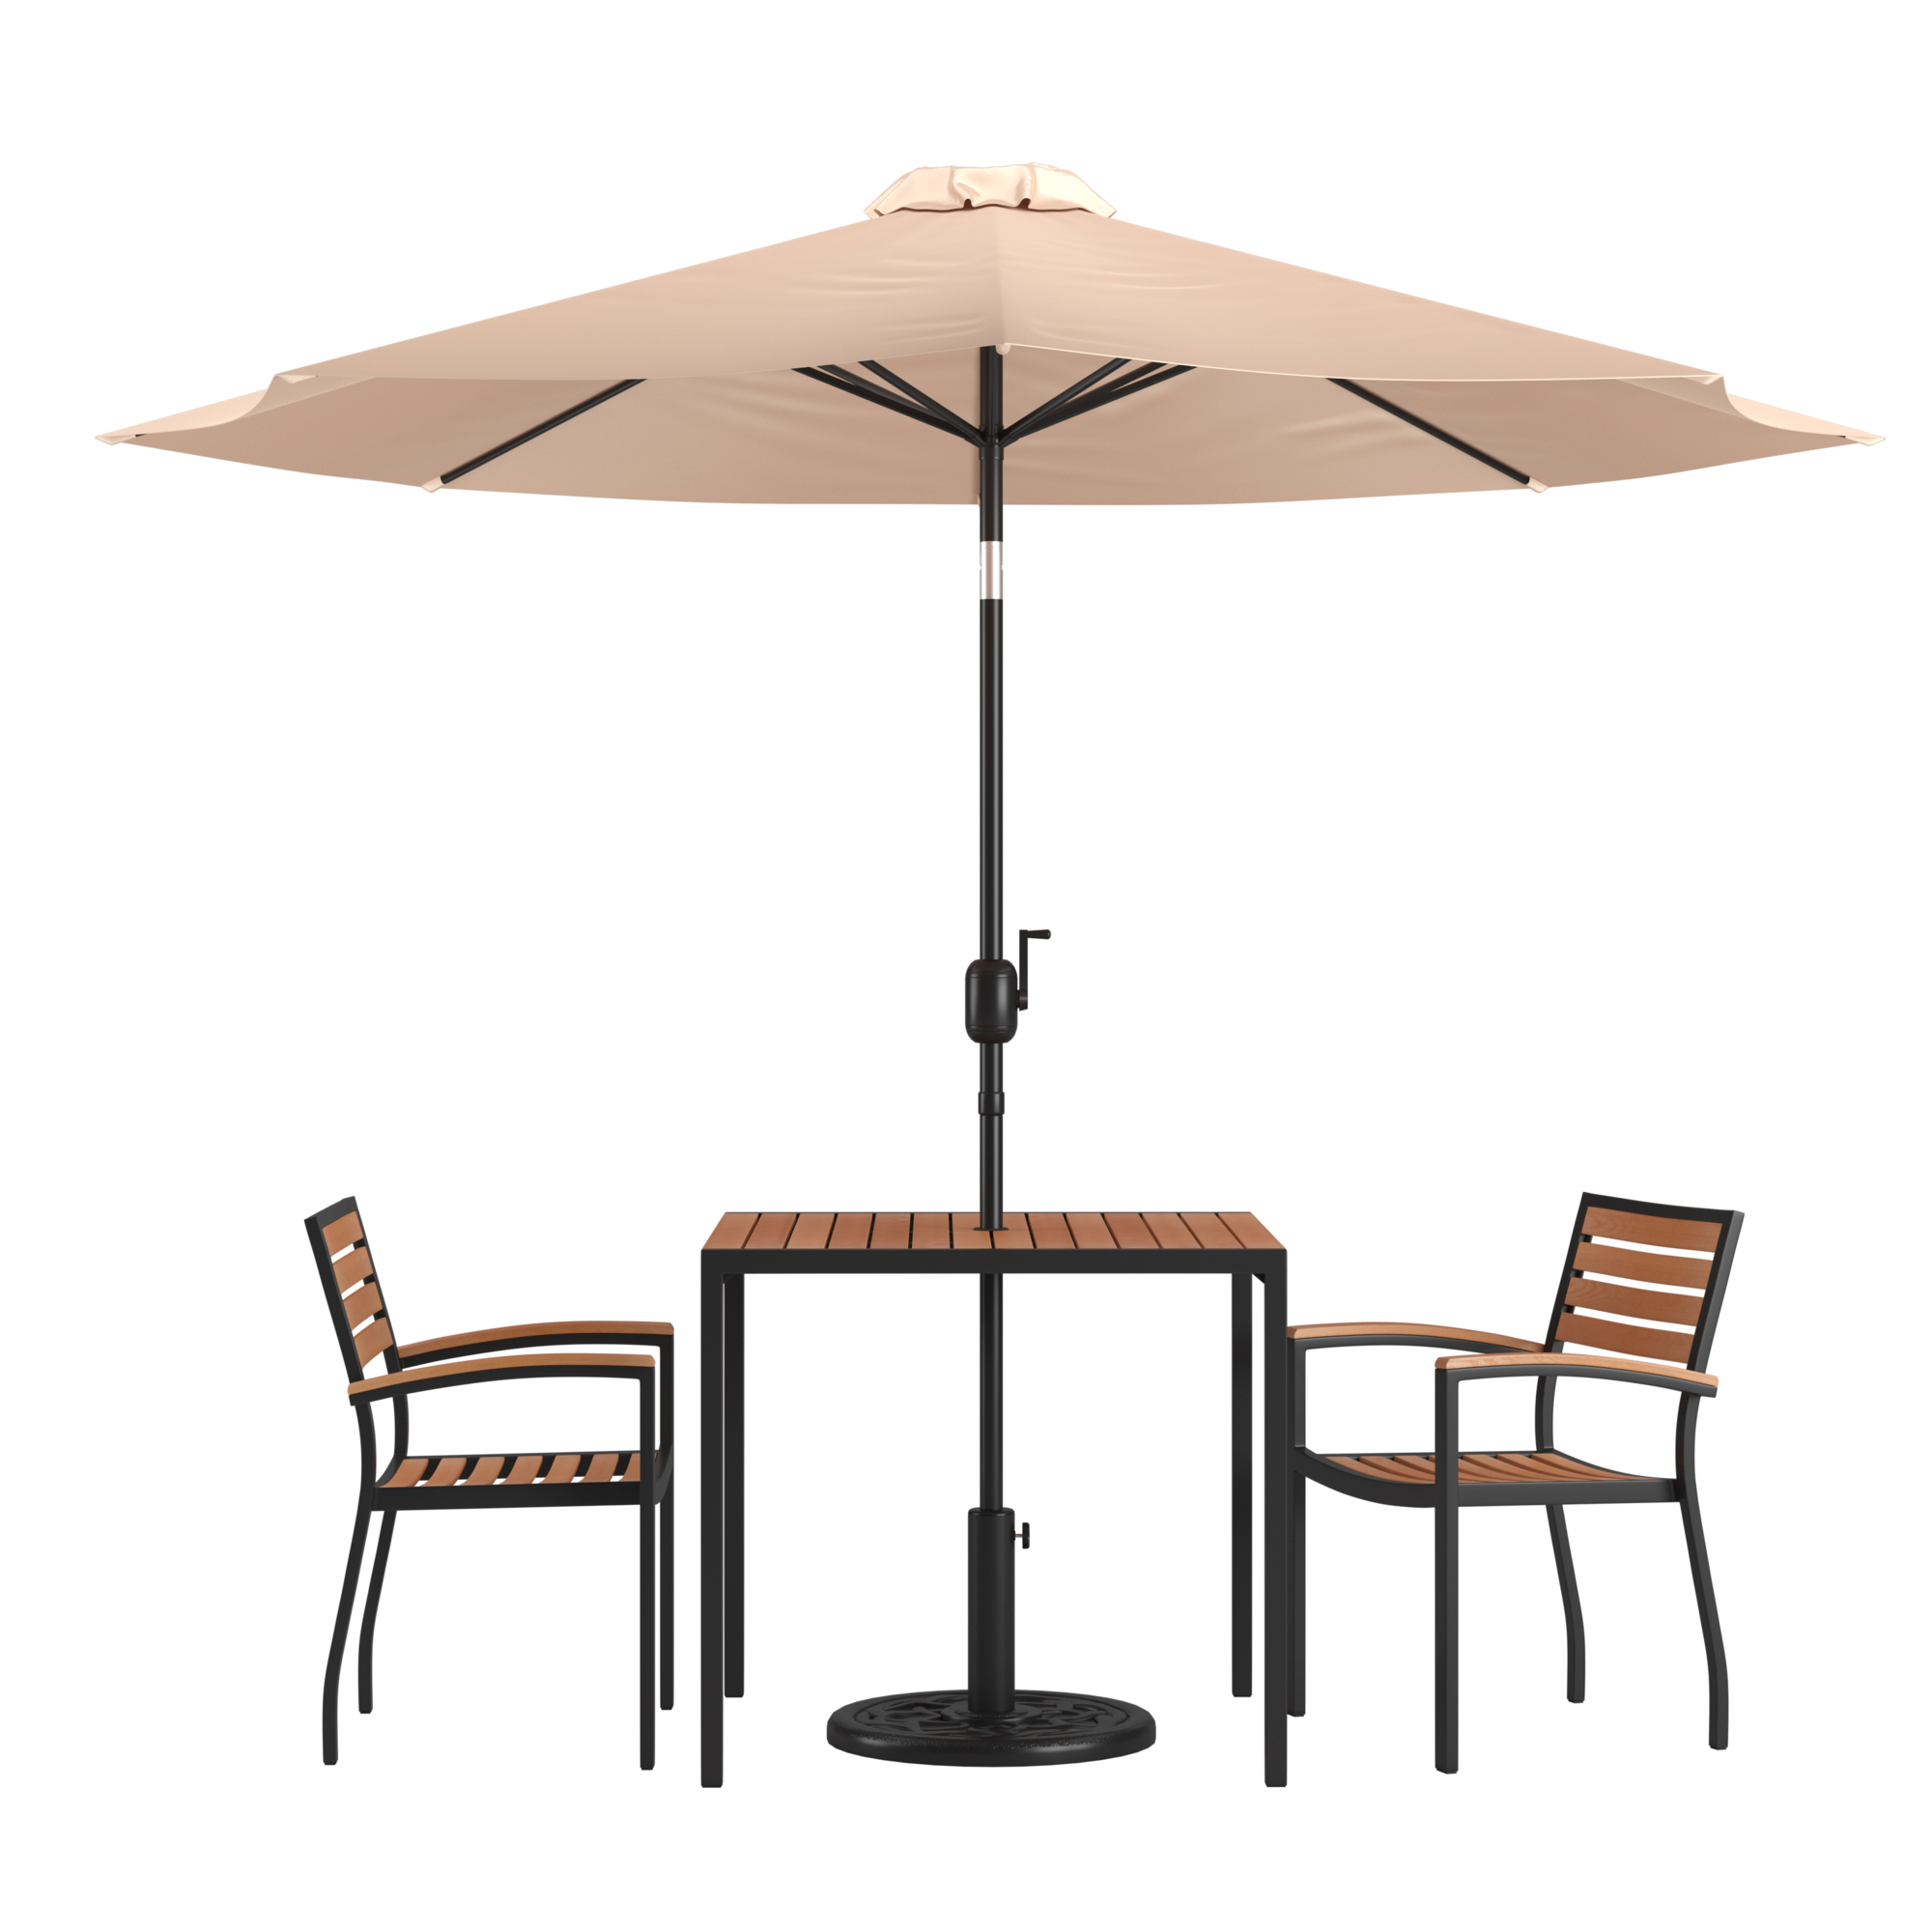 Flash Furniture, Patio Set-35Inch Table-2 Chairs-Tan Umbrella-Base, Pieces (qty.) 5, Primary Color Beige, Seating Capacity 2, Model XU8102UB19BTN